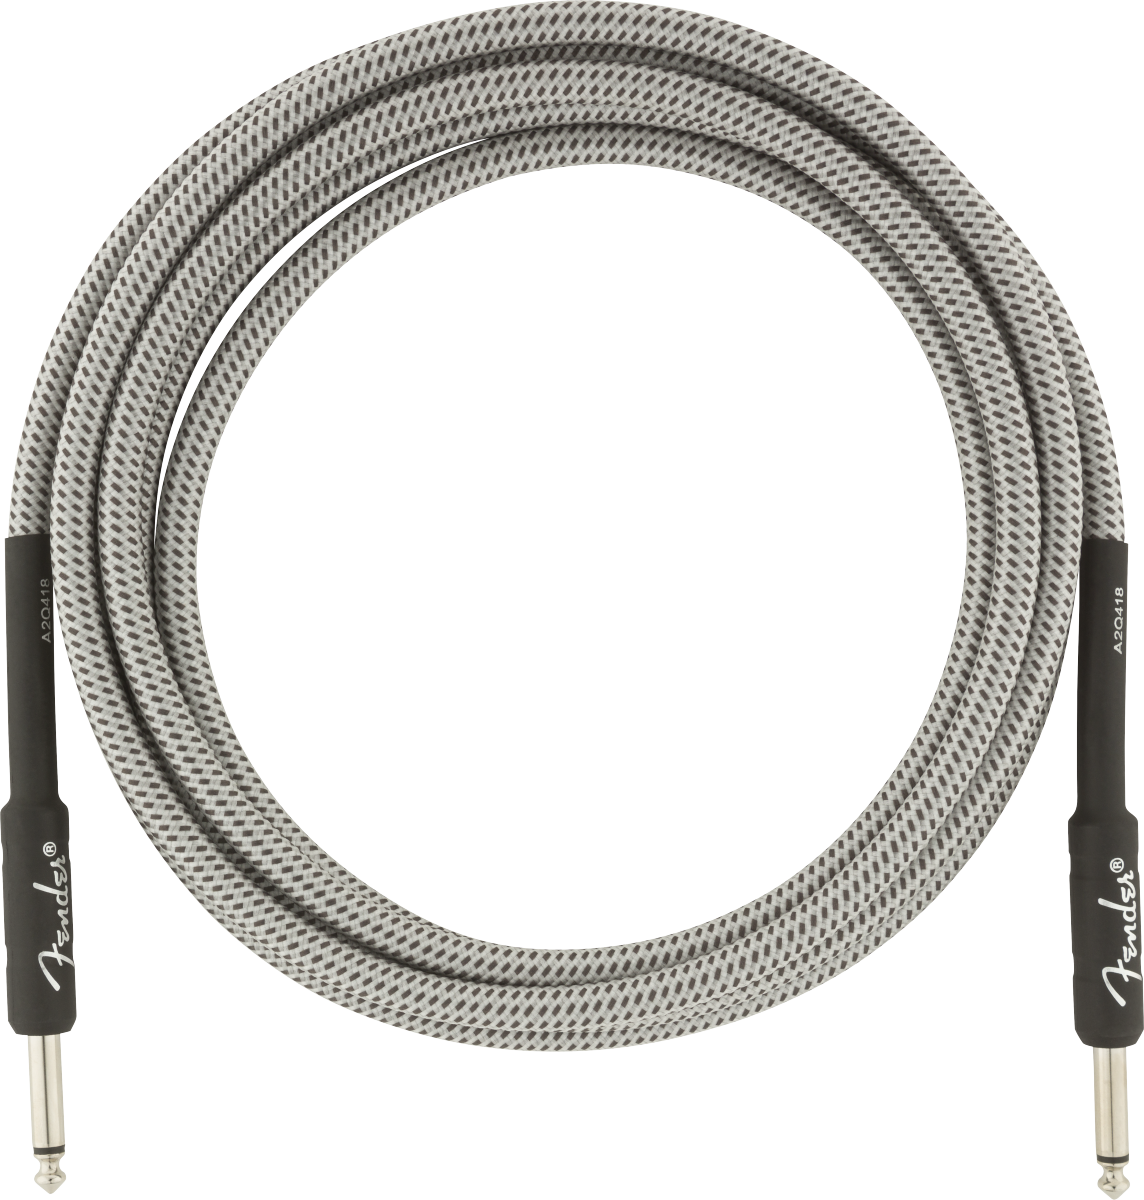 FENDER Professional Series Instrument Cable, 10', White Tweed (0990820063)